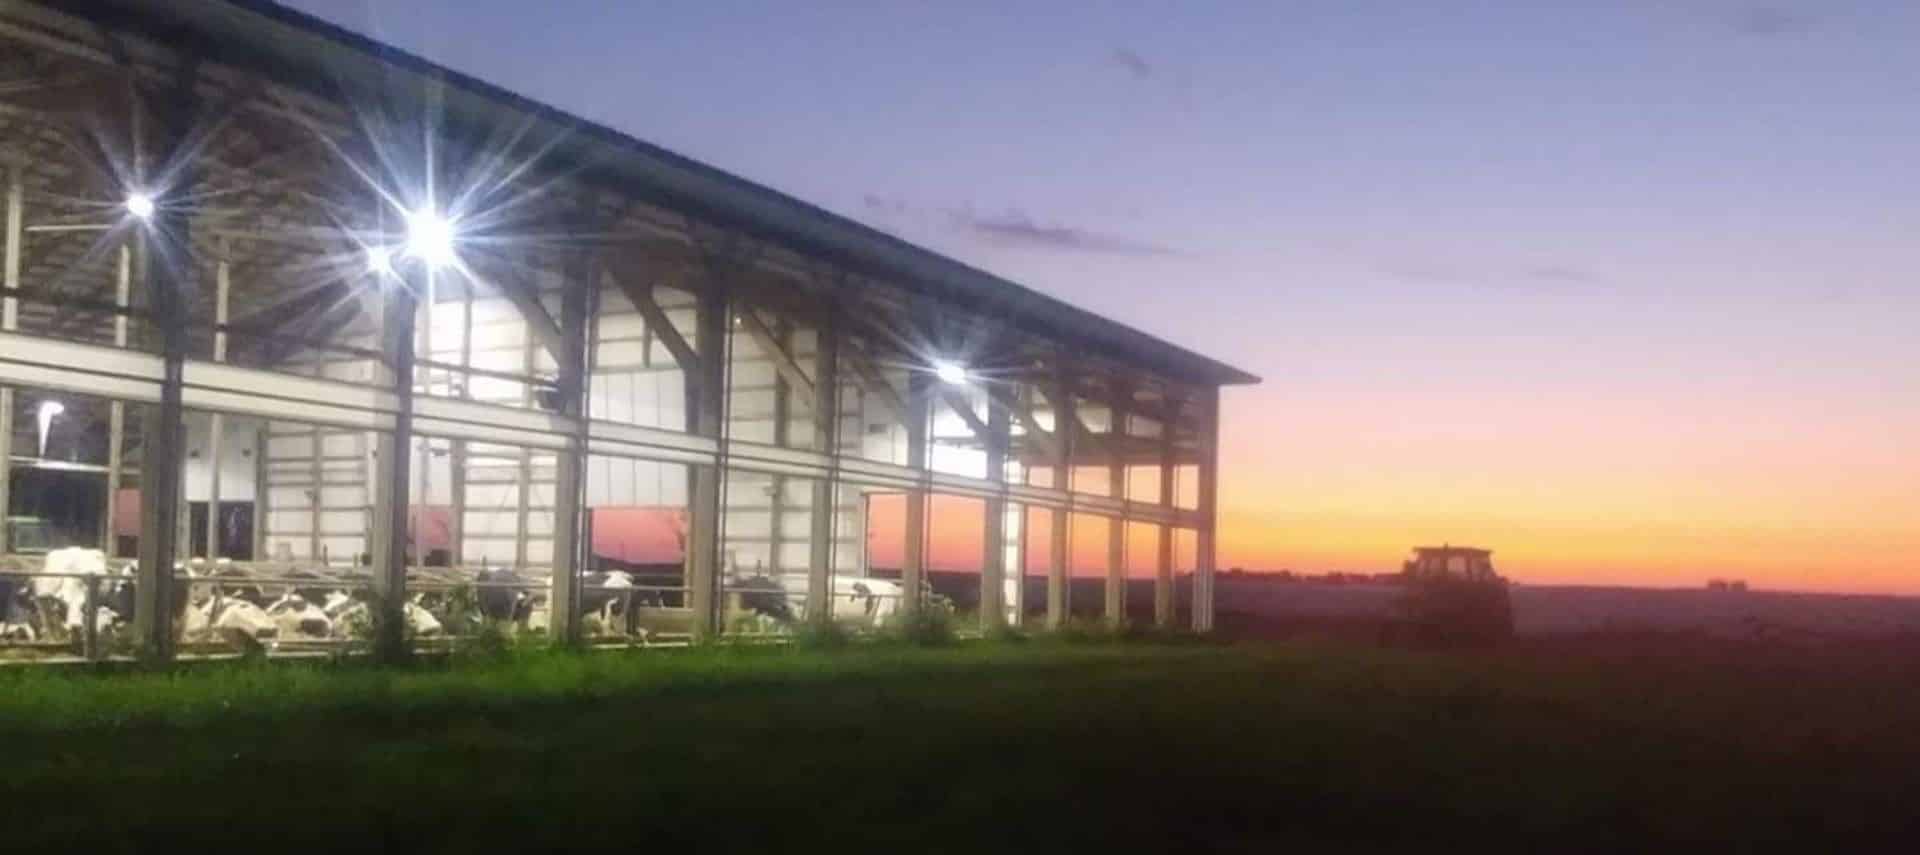 Exterior view of dairy barn with black and white dairy cows at dusk with a tractor in the background